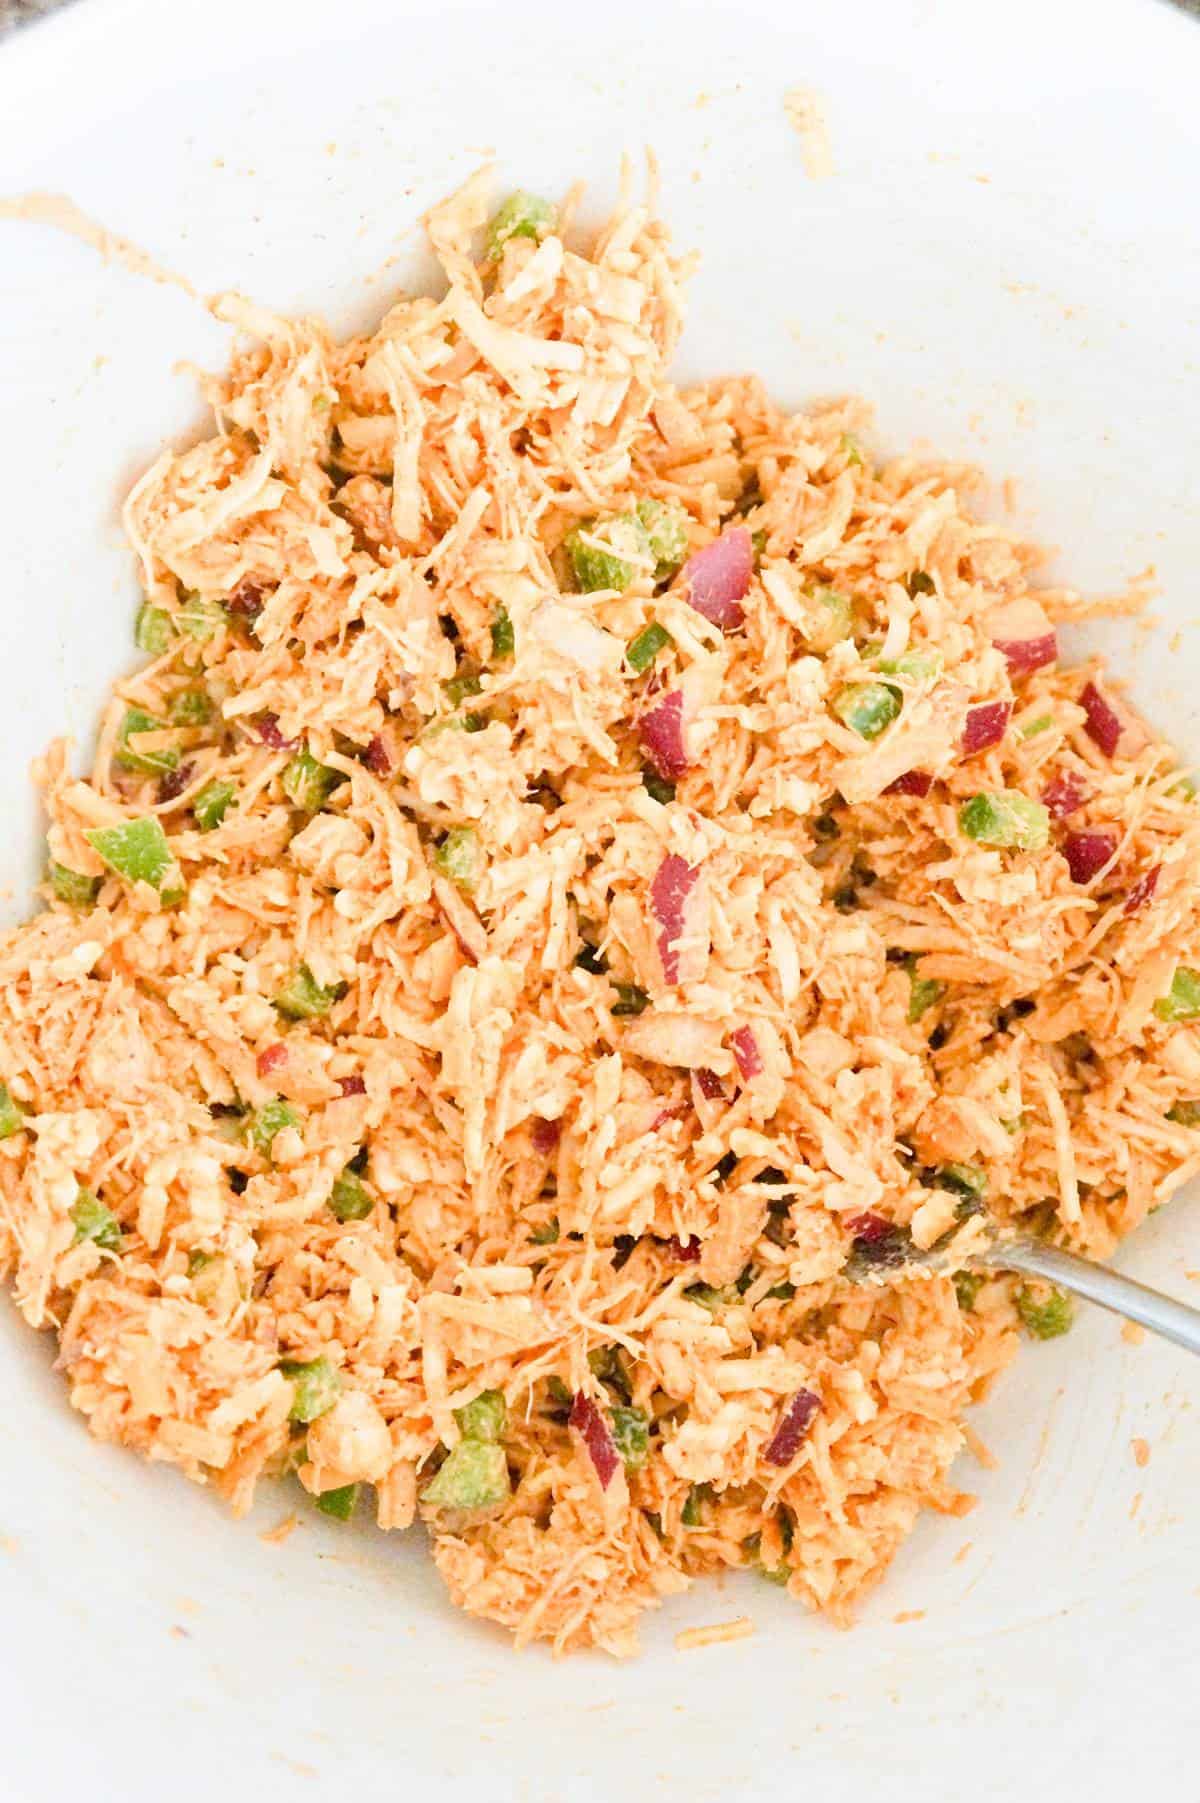 shredded chicken taco mixture in a mixing bowl